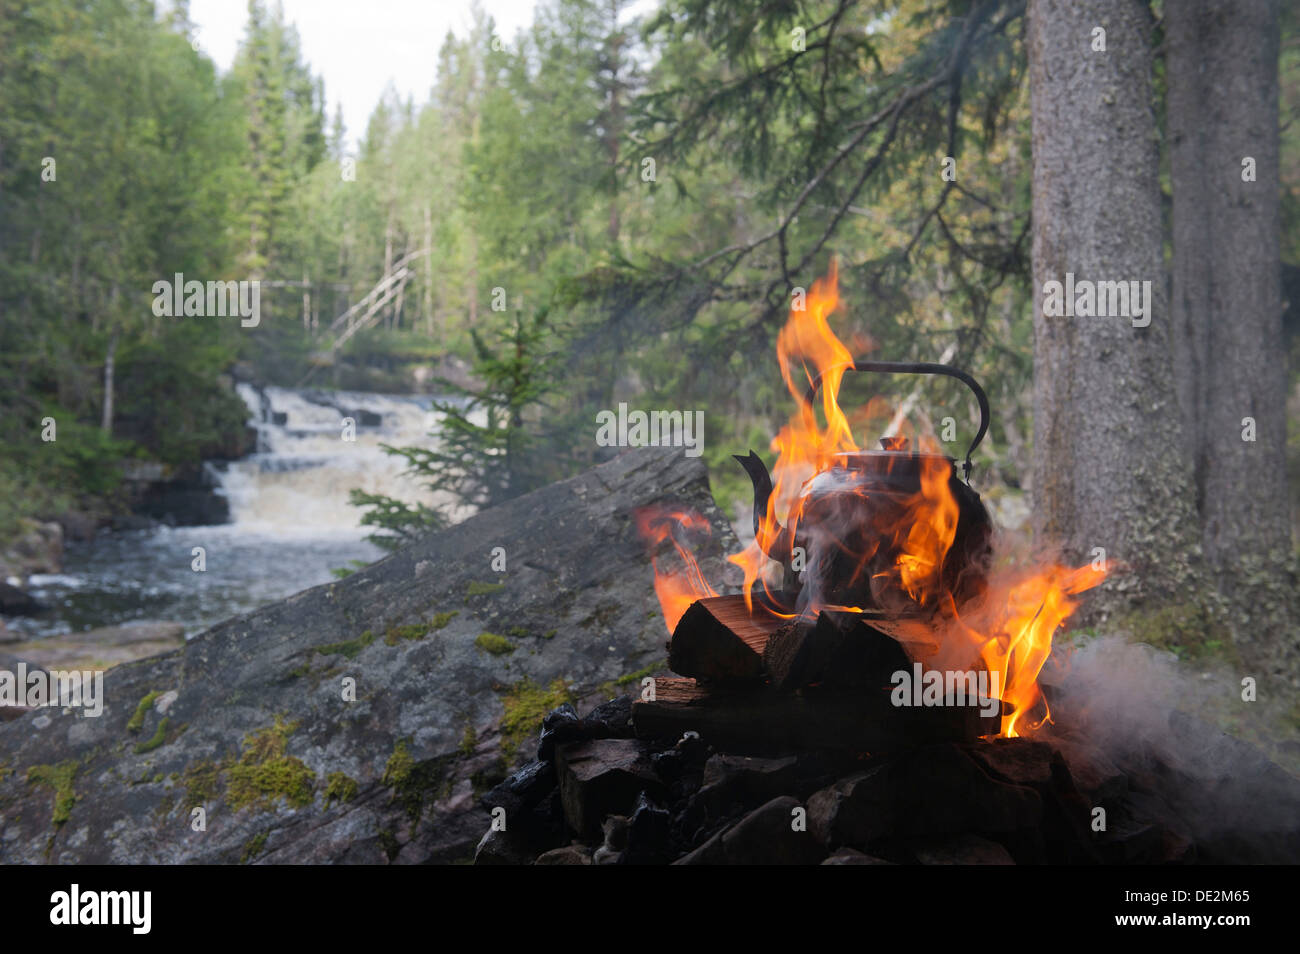 Water is boiled in the wilderness, coffee kettle on an open fire, flames and smoke, Fulvan river, Tjaernvallen near the Stock Photo